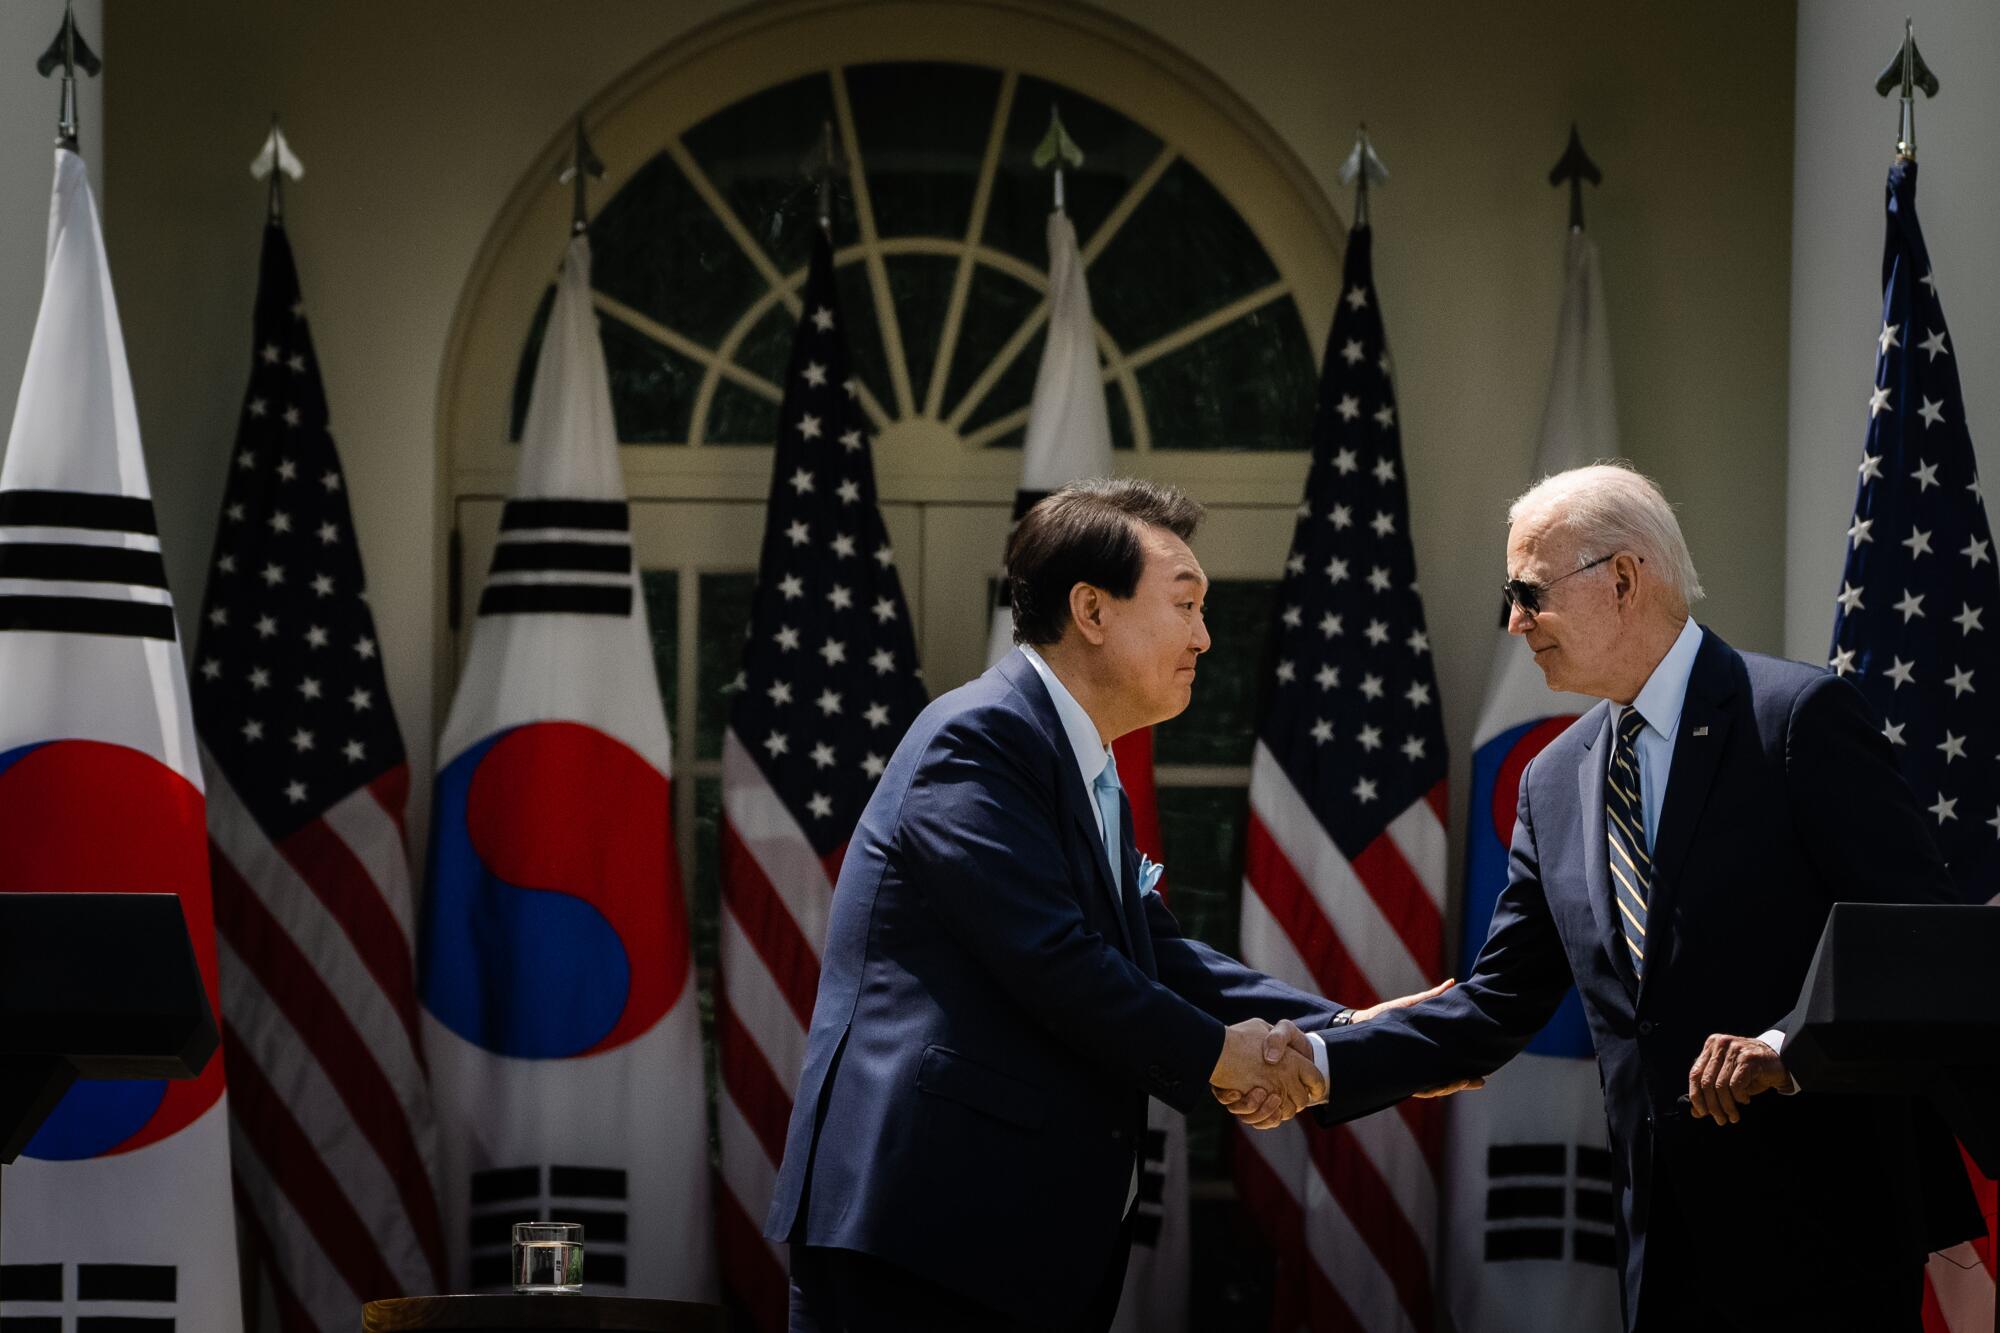 South Korean President Yoon Suk Yeol and President Biden hold a joint press conference in the Rose Garden.